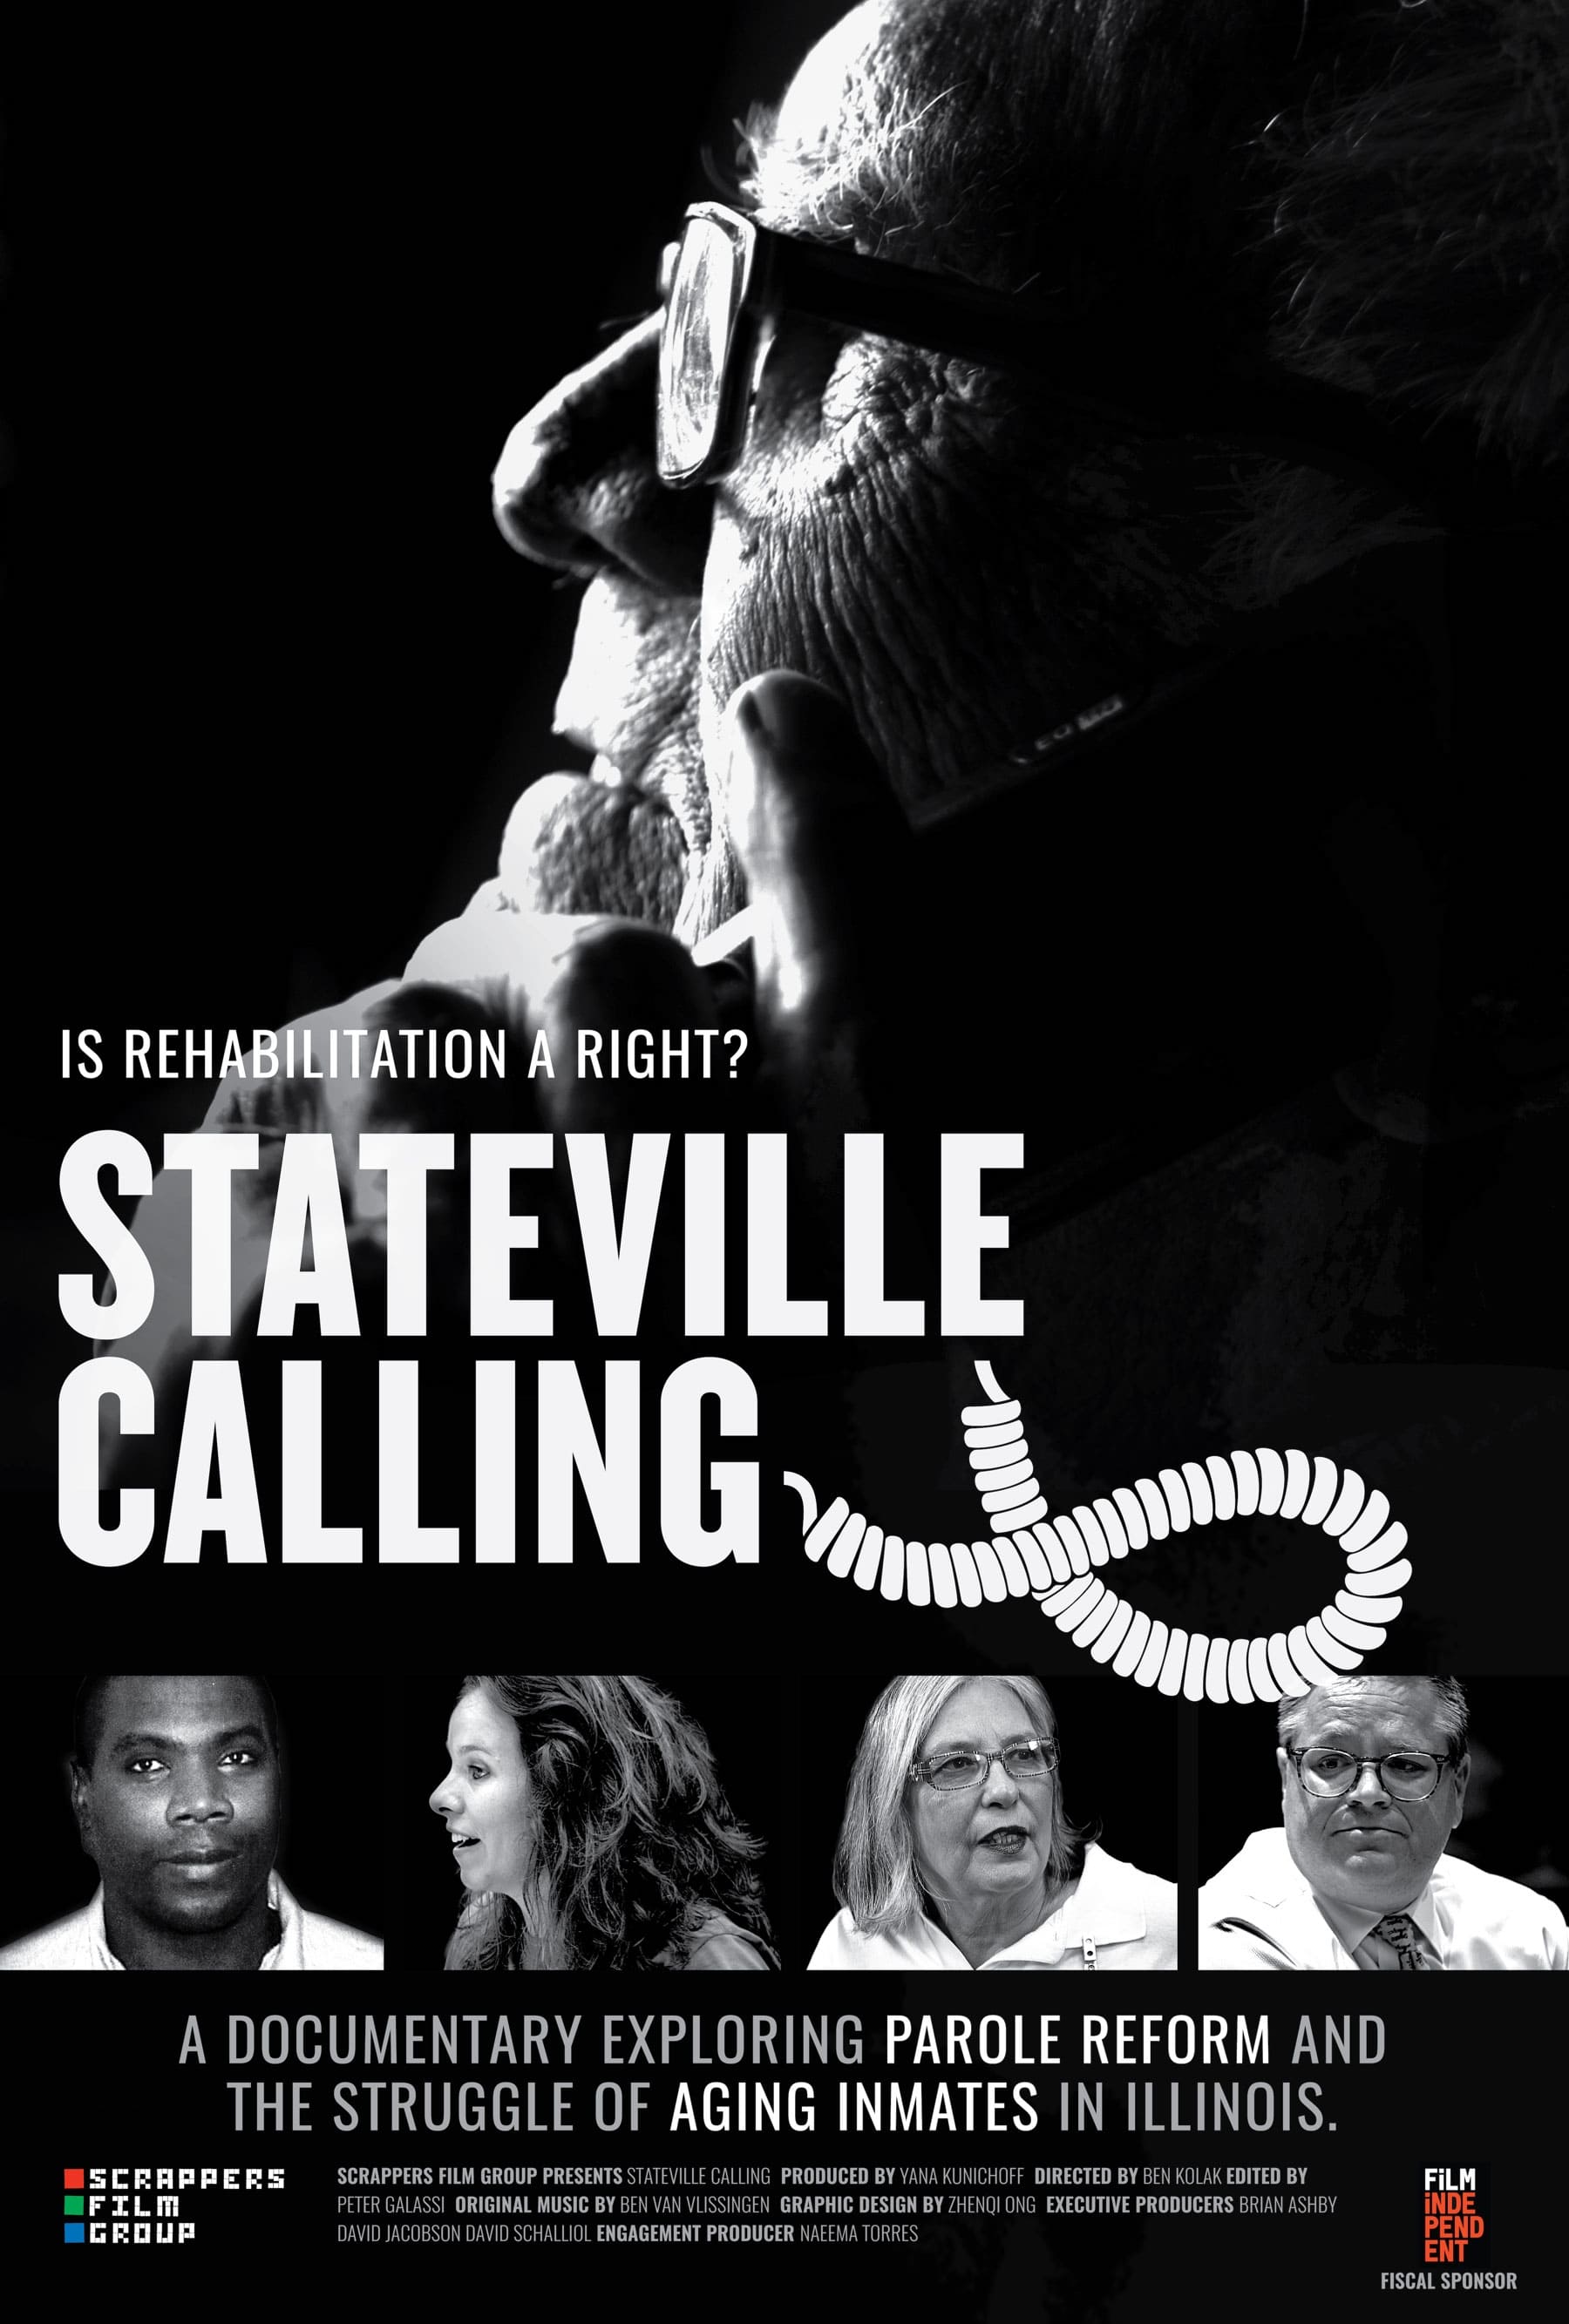 Stateville Calling